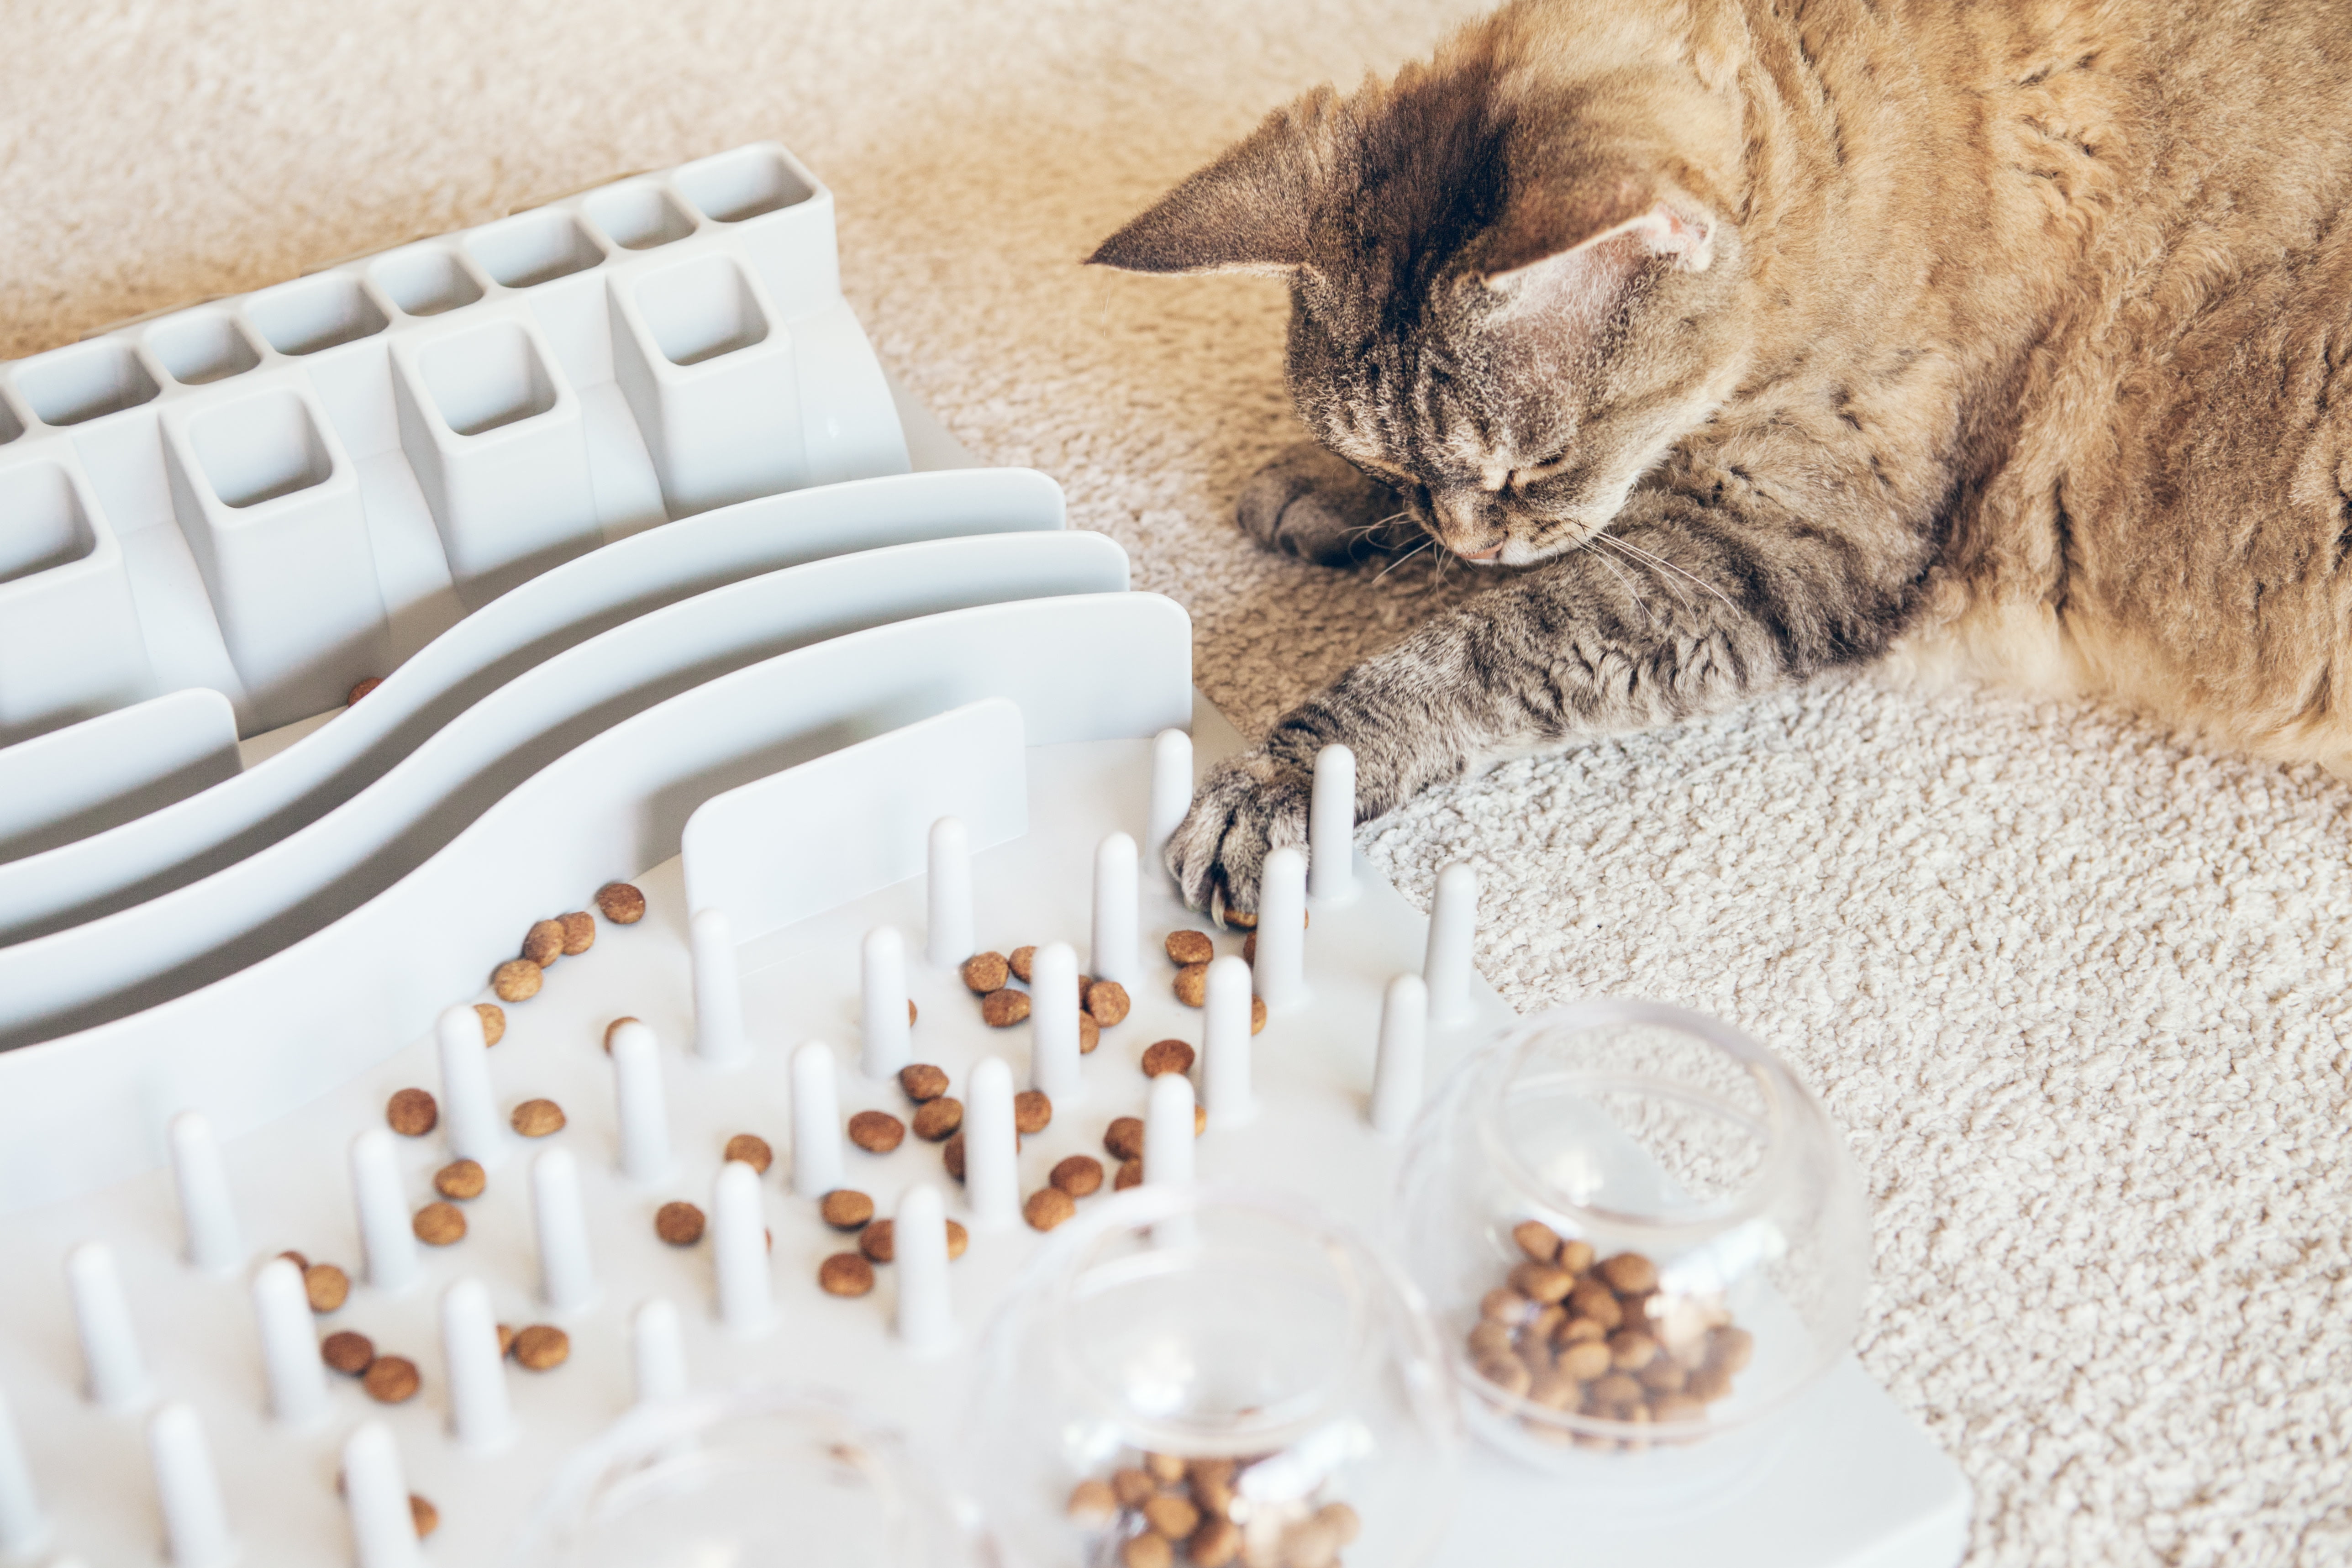 Trixie Activity Flip Board is a Fun Puzzle Toy for Cats - Patience for Cats